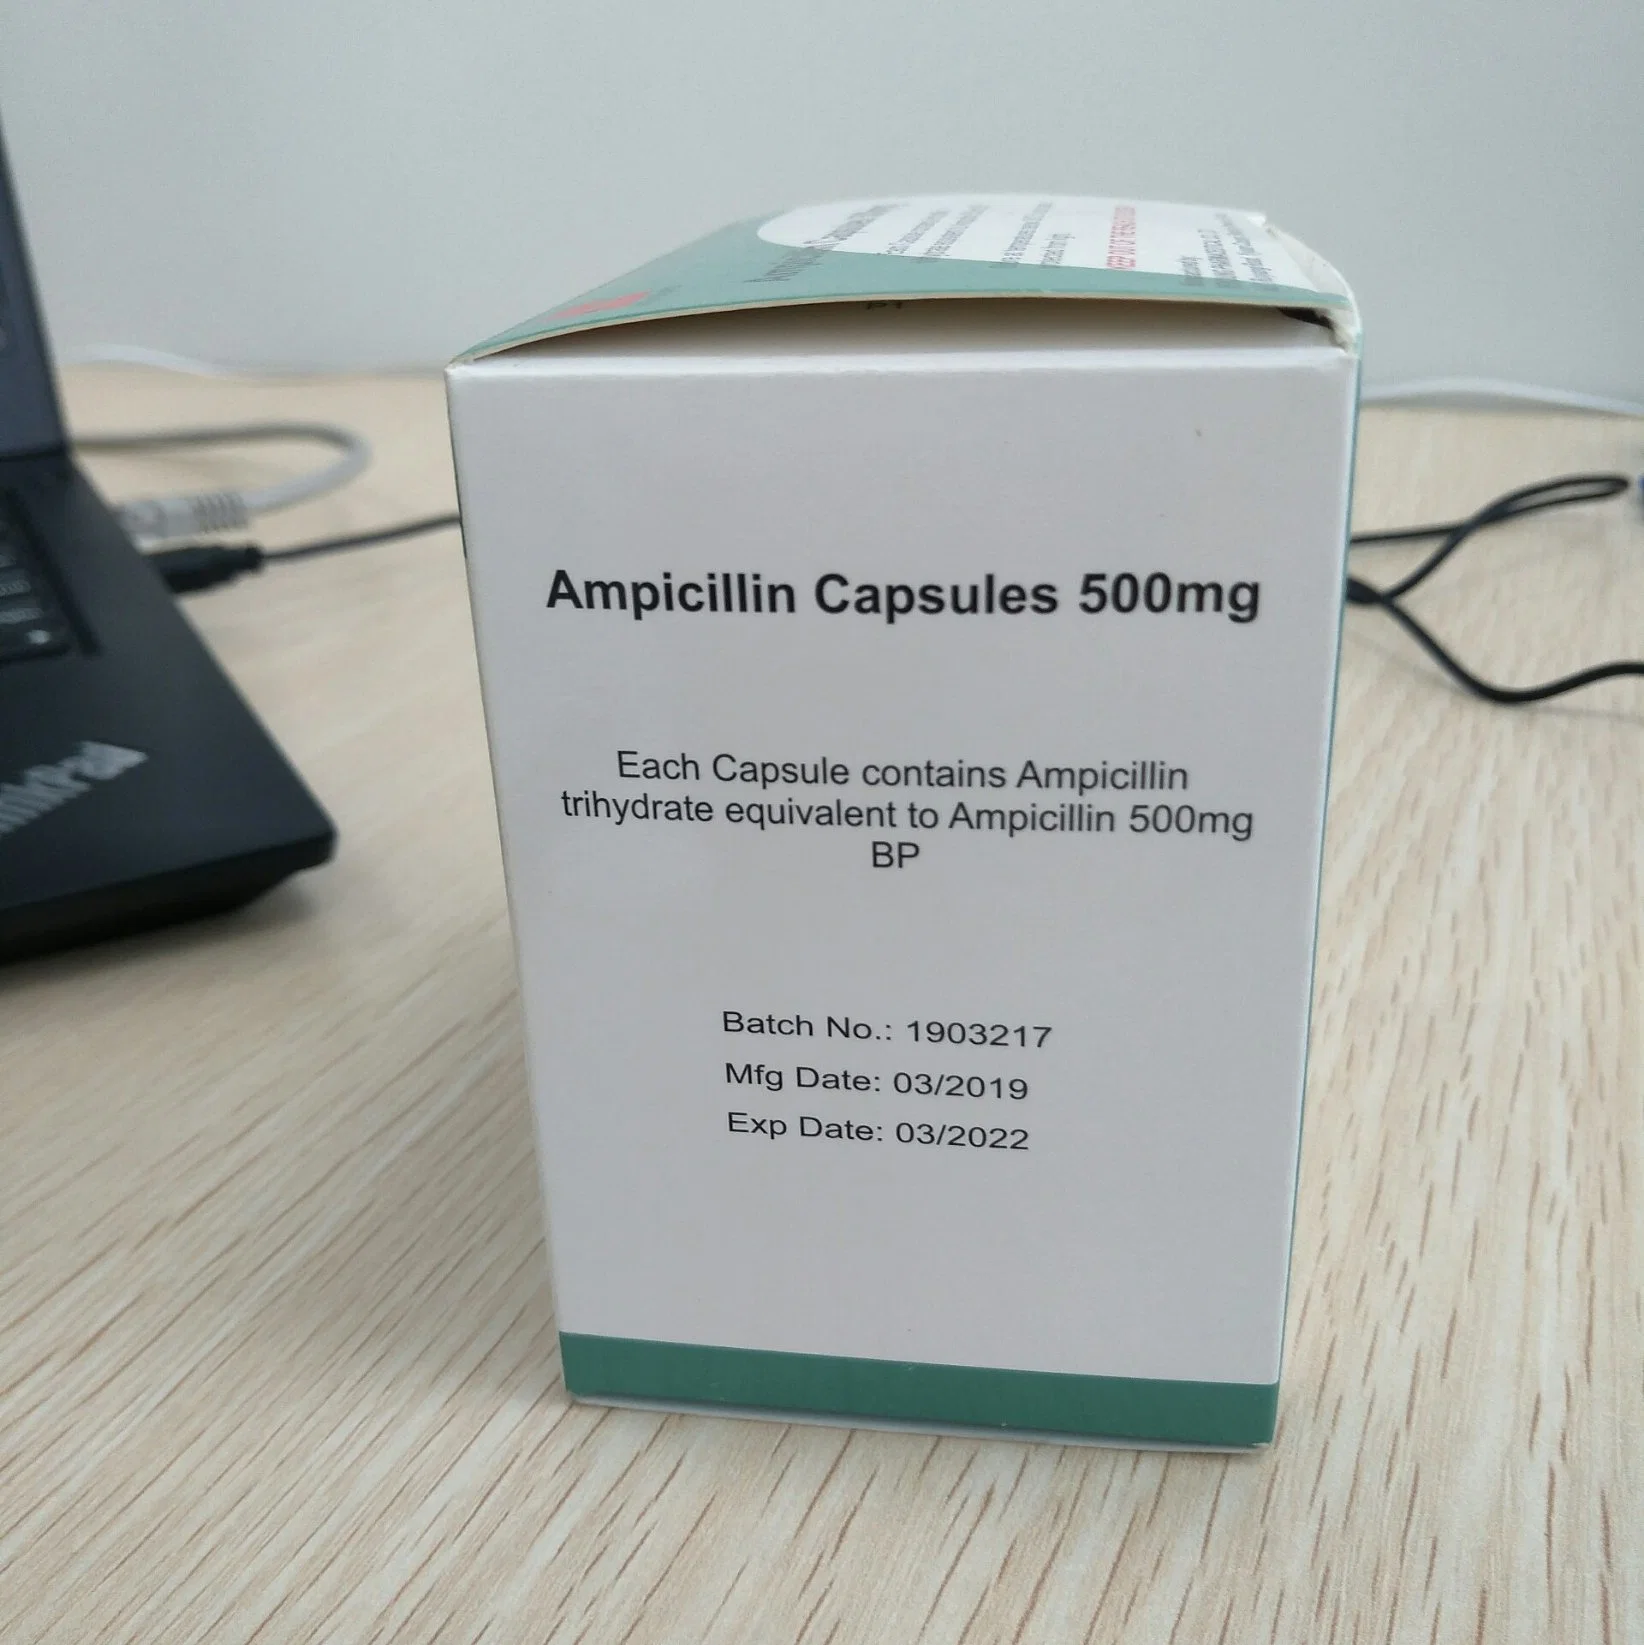 Pharmaceutical Ampicillin Capsule 500mg with GMP Certificate